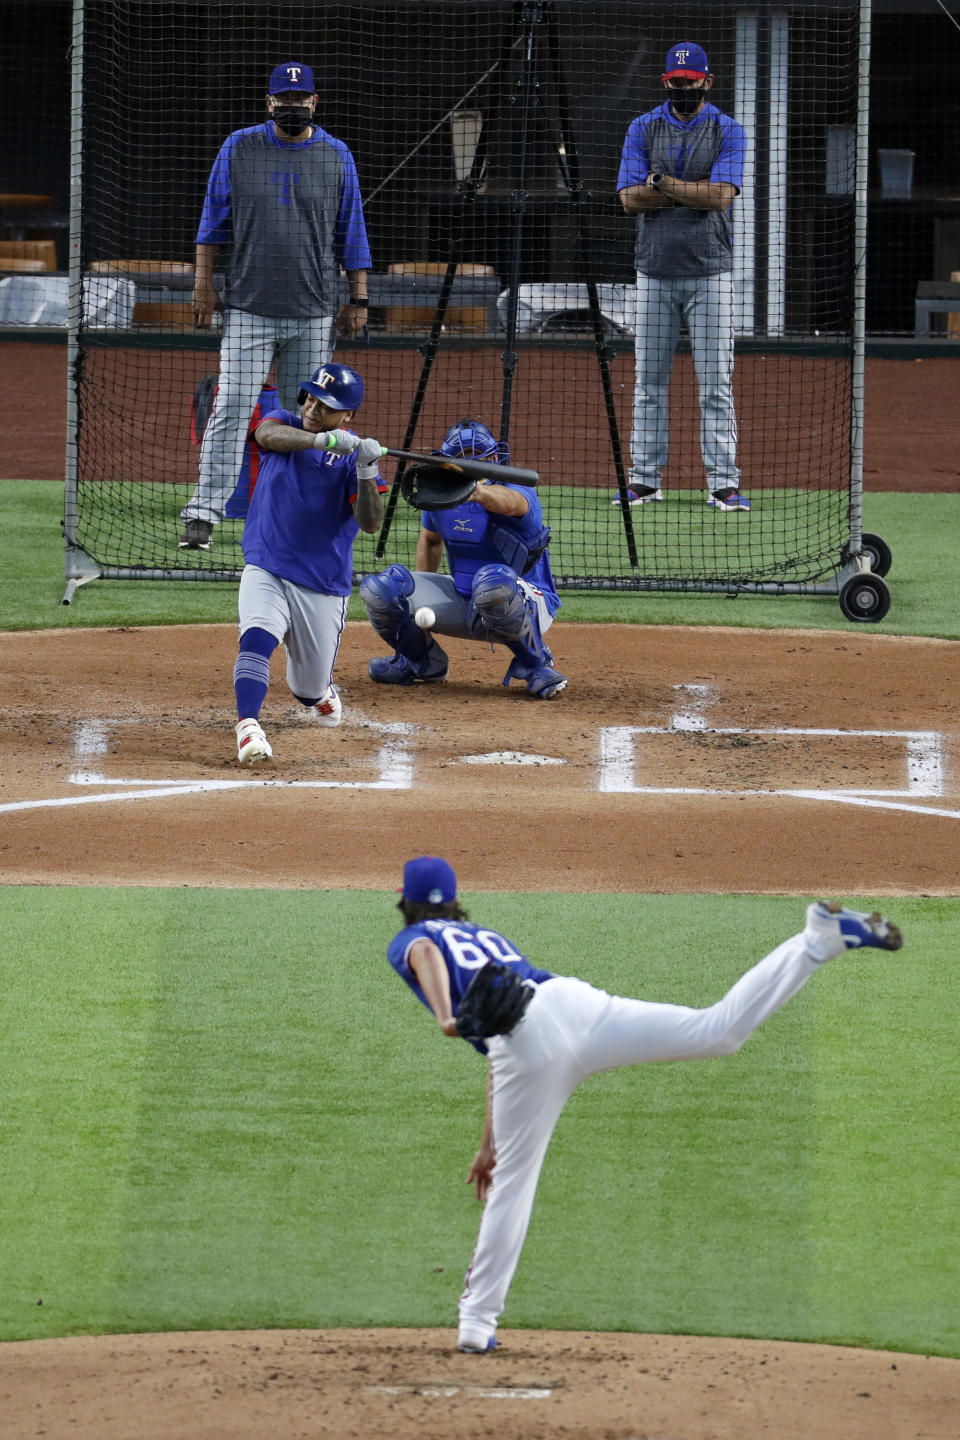 Texas Rangers' Luke Farrell throws to Willie Calhoun as catcher Jeff Mathis, pitching coach Julio Rangel, left rear and manager Chris Woodward, right rear, look on during a baseball practice at Globe Life Field in Arlington, Texas, Friday, July 3, 2020. (AP Photo/Tony Gutierrez)